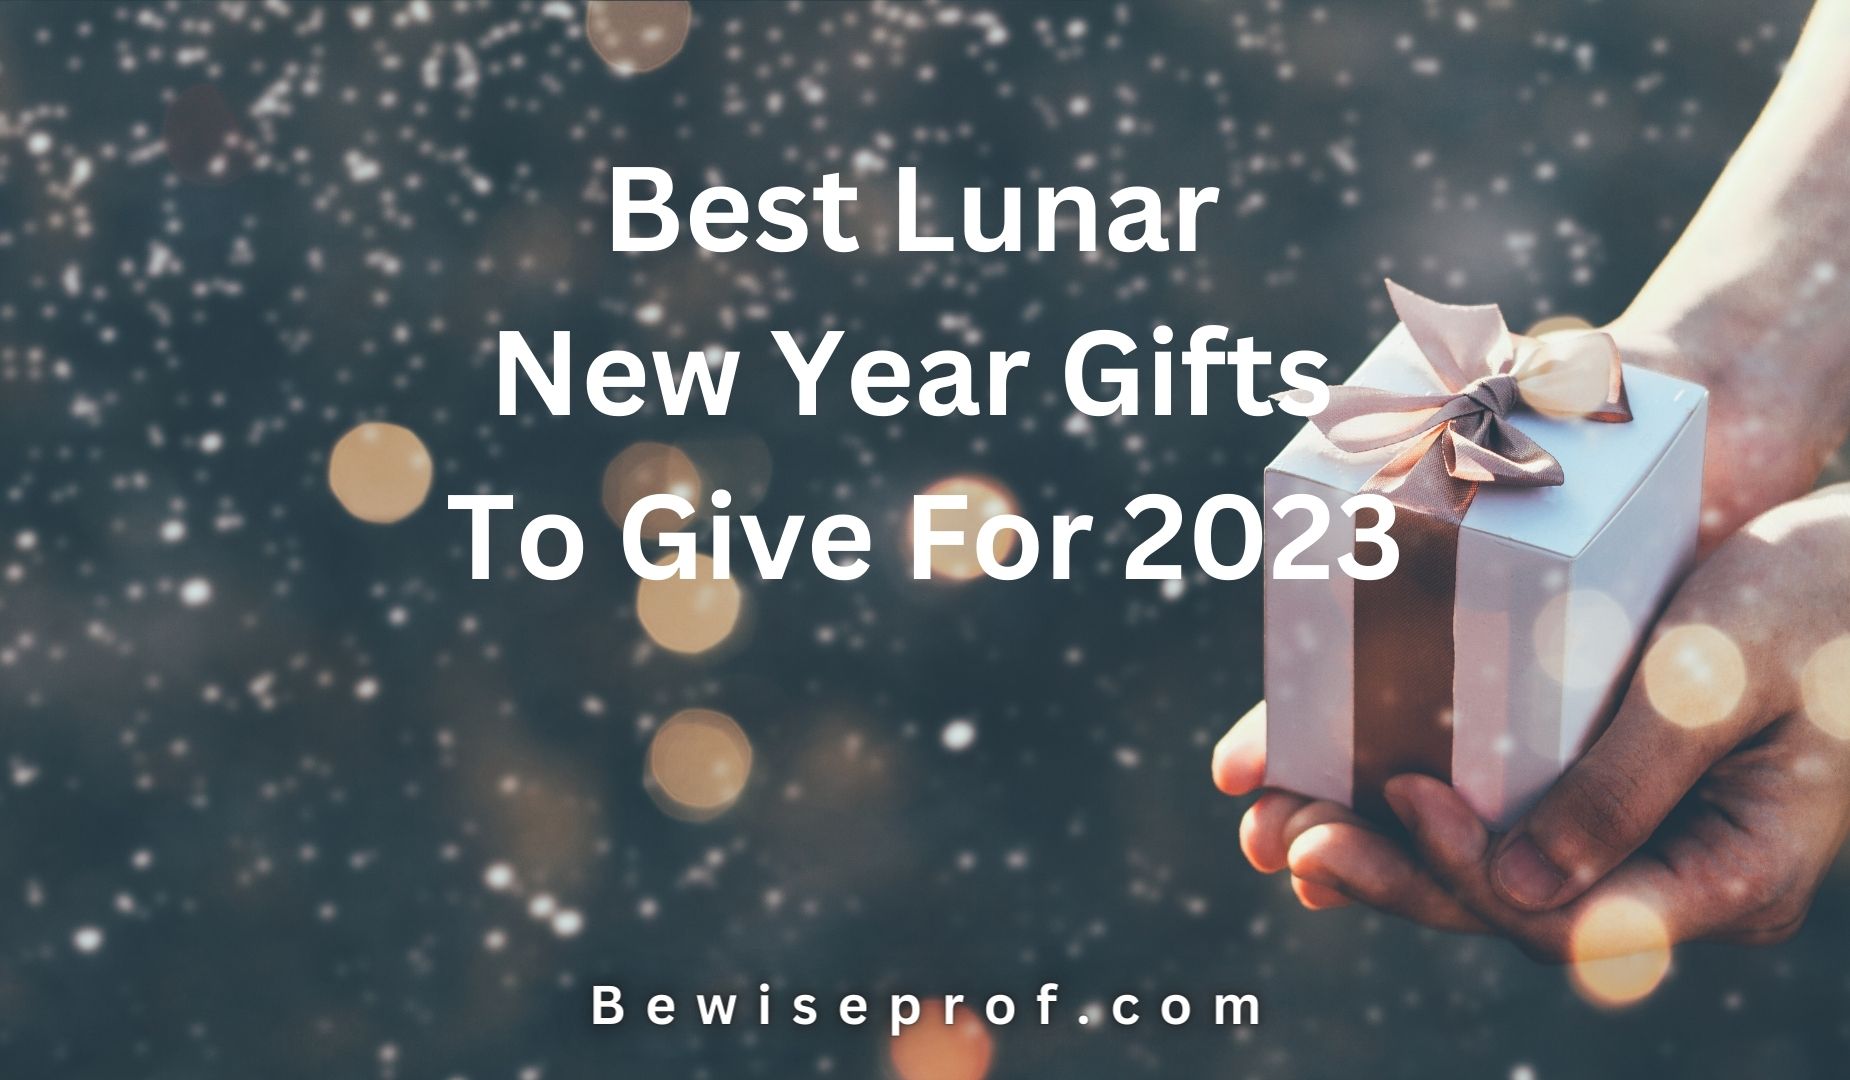 Best Lunar New Year Gifts To Give For 2023